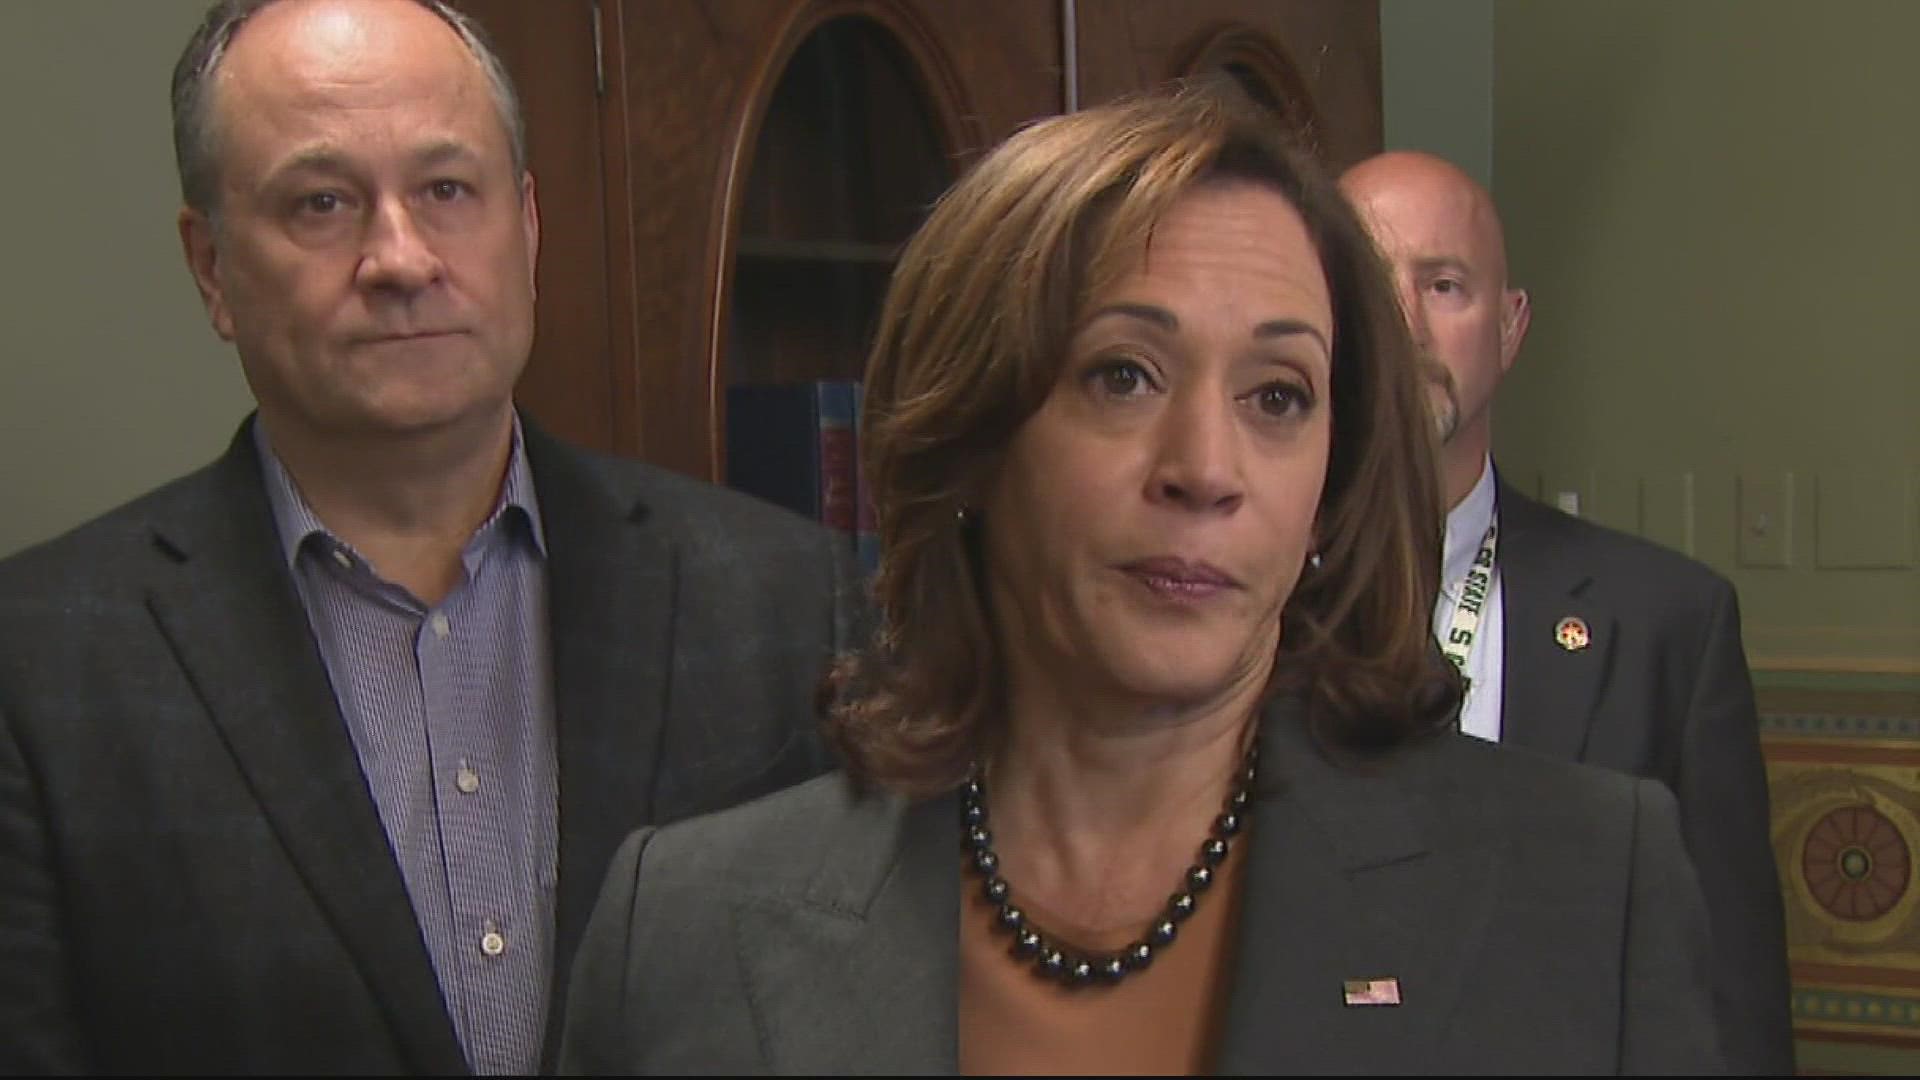 Vice President Kamala Harris says this tragedy is a reminder of how much more work our country has to do.